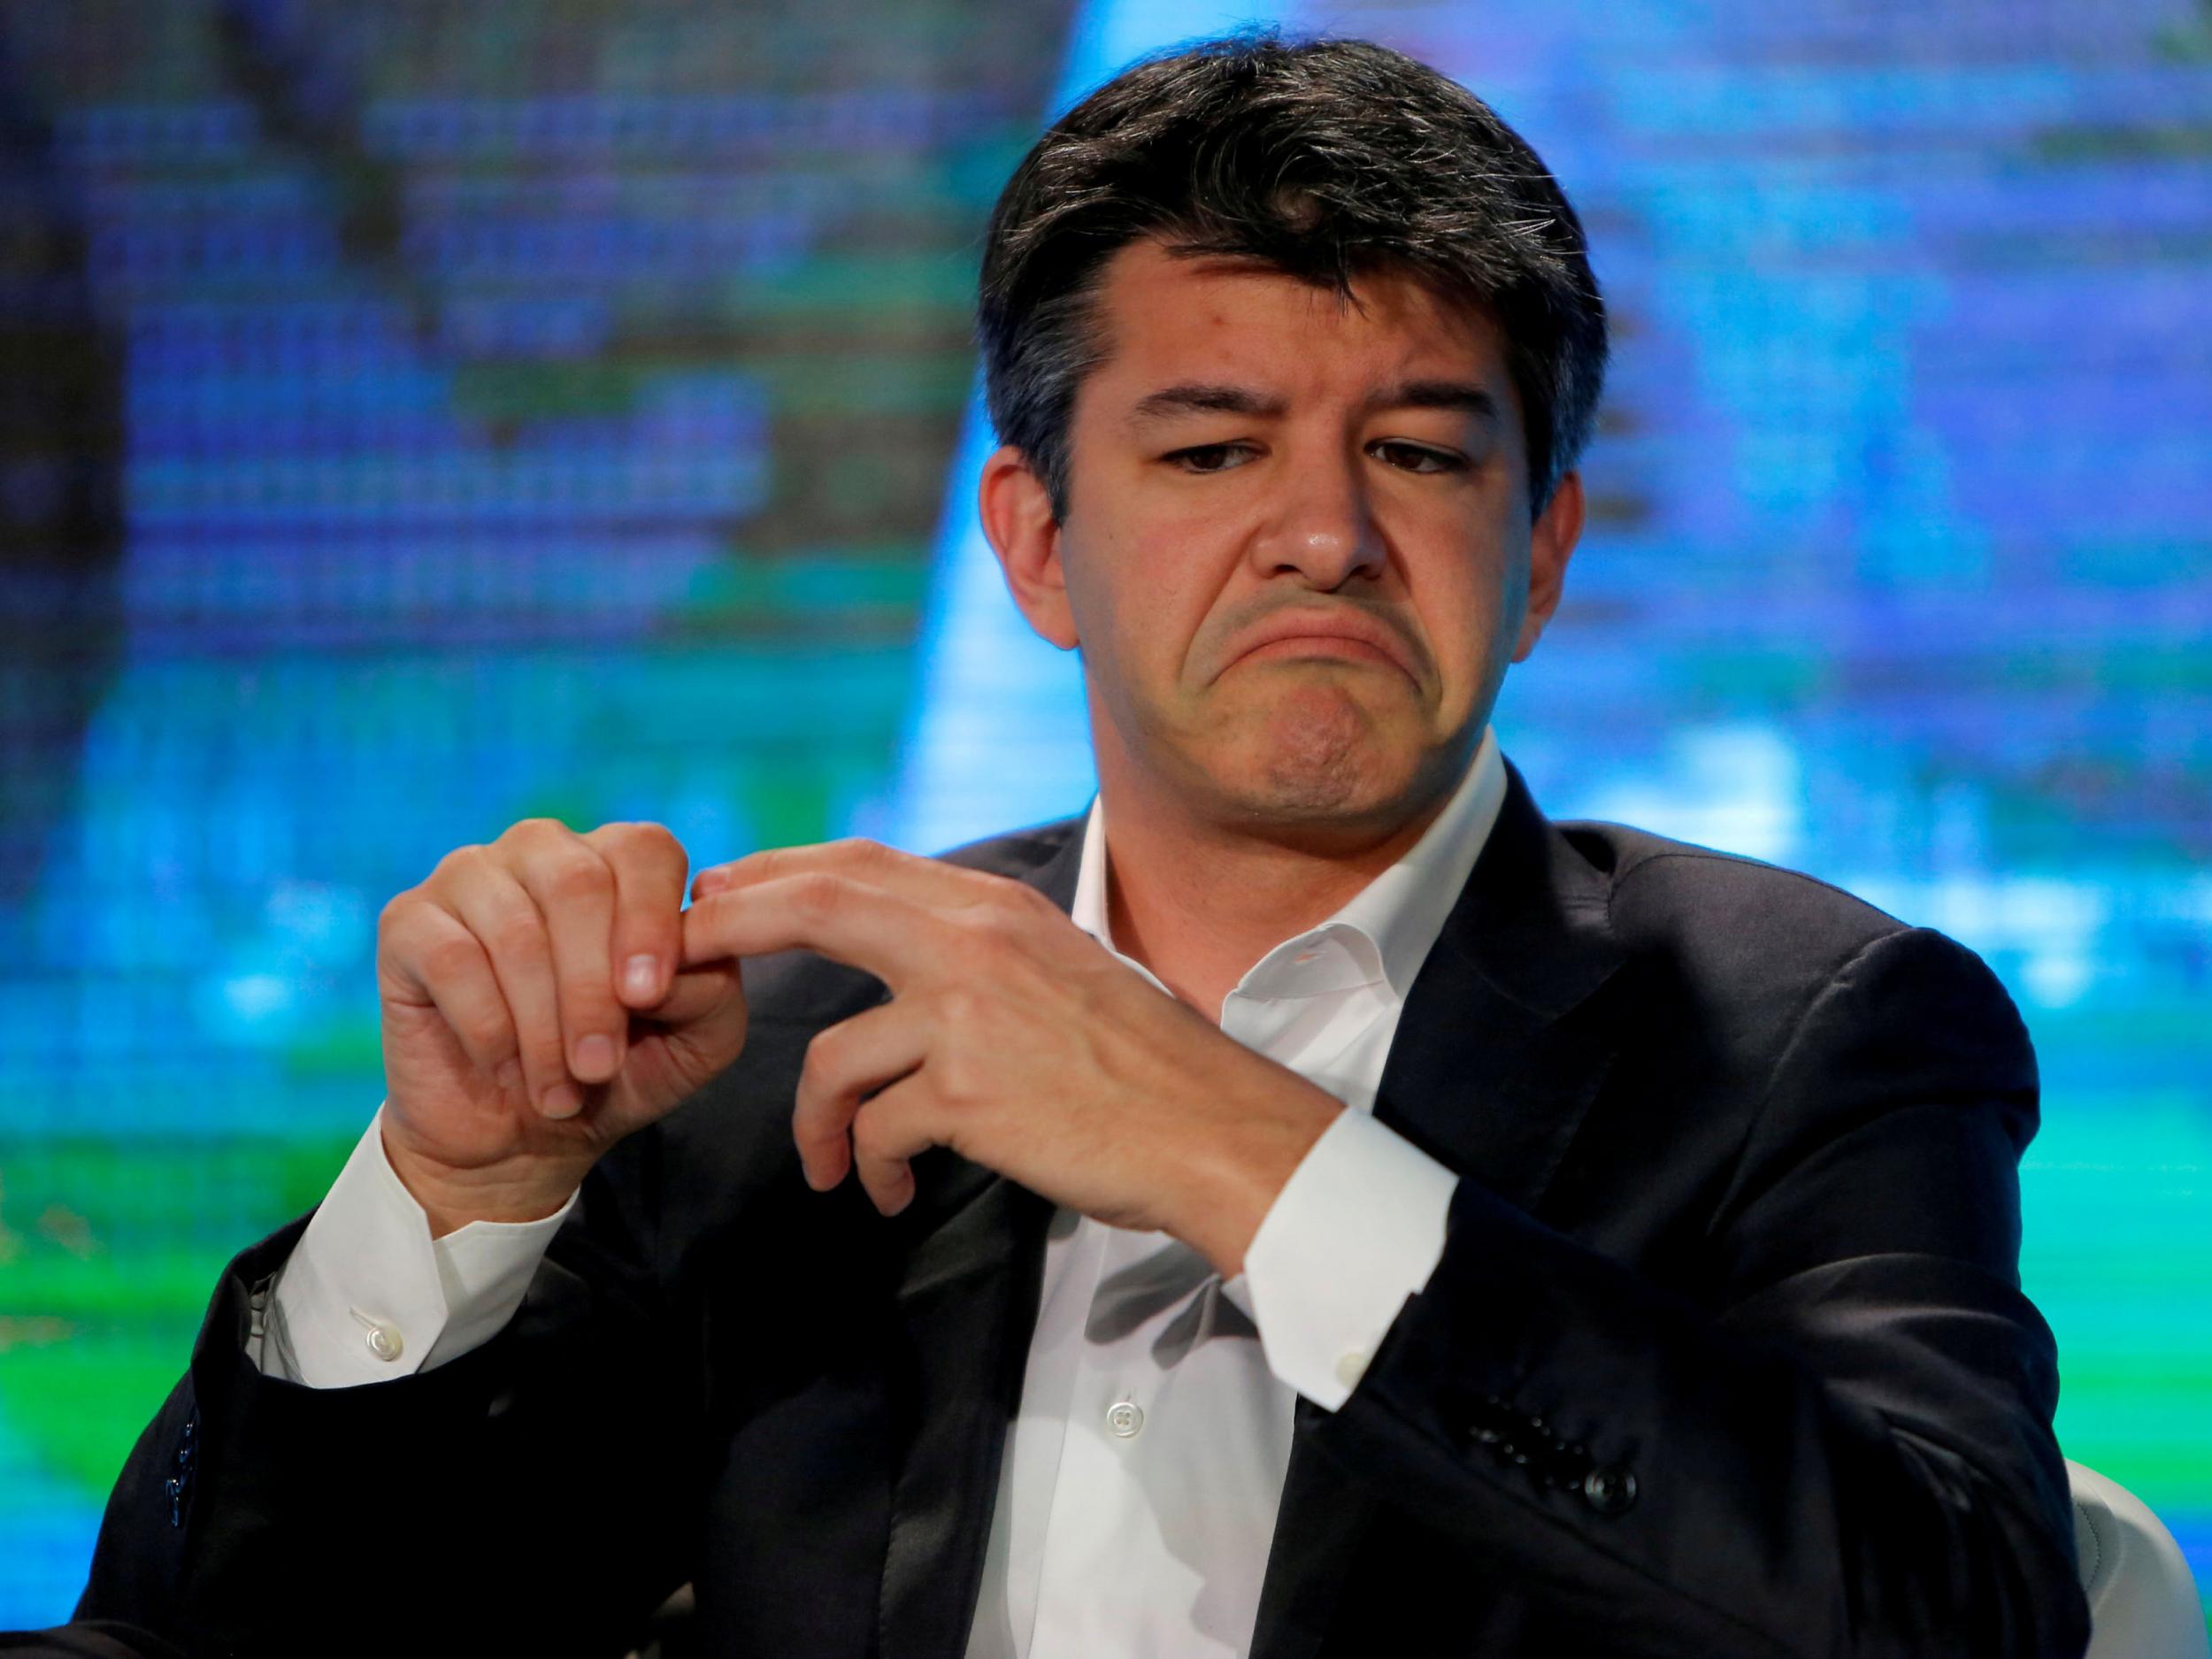 Chief executive Travis Kalanick defined Uber’s culture by hiring deputies who were, in many instances, either willing to push legal boundaries or look the other way